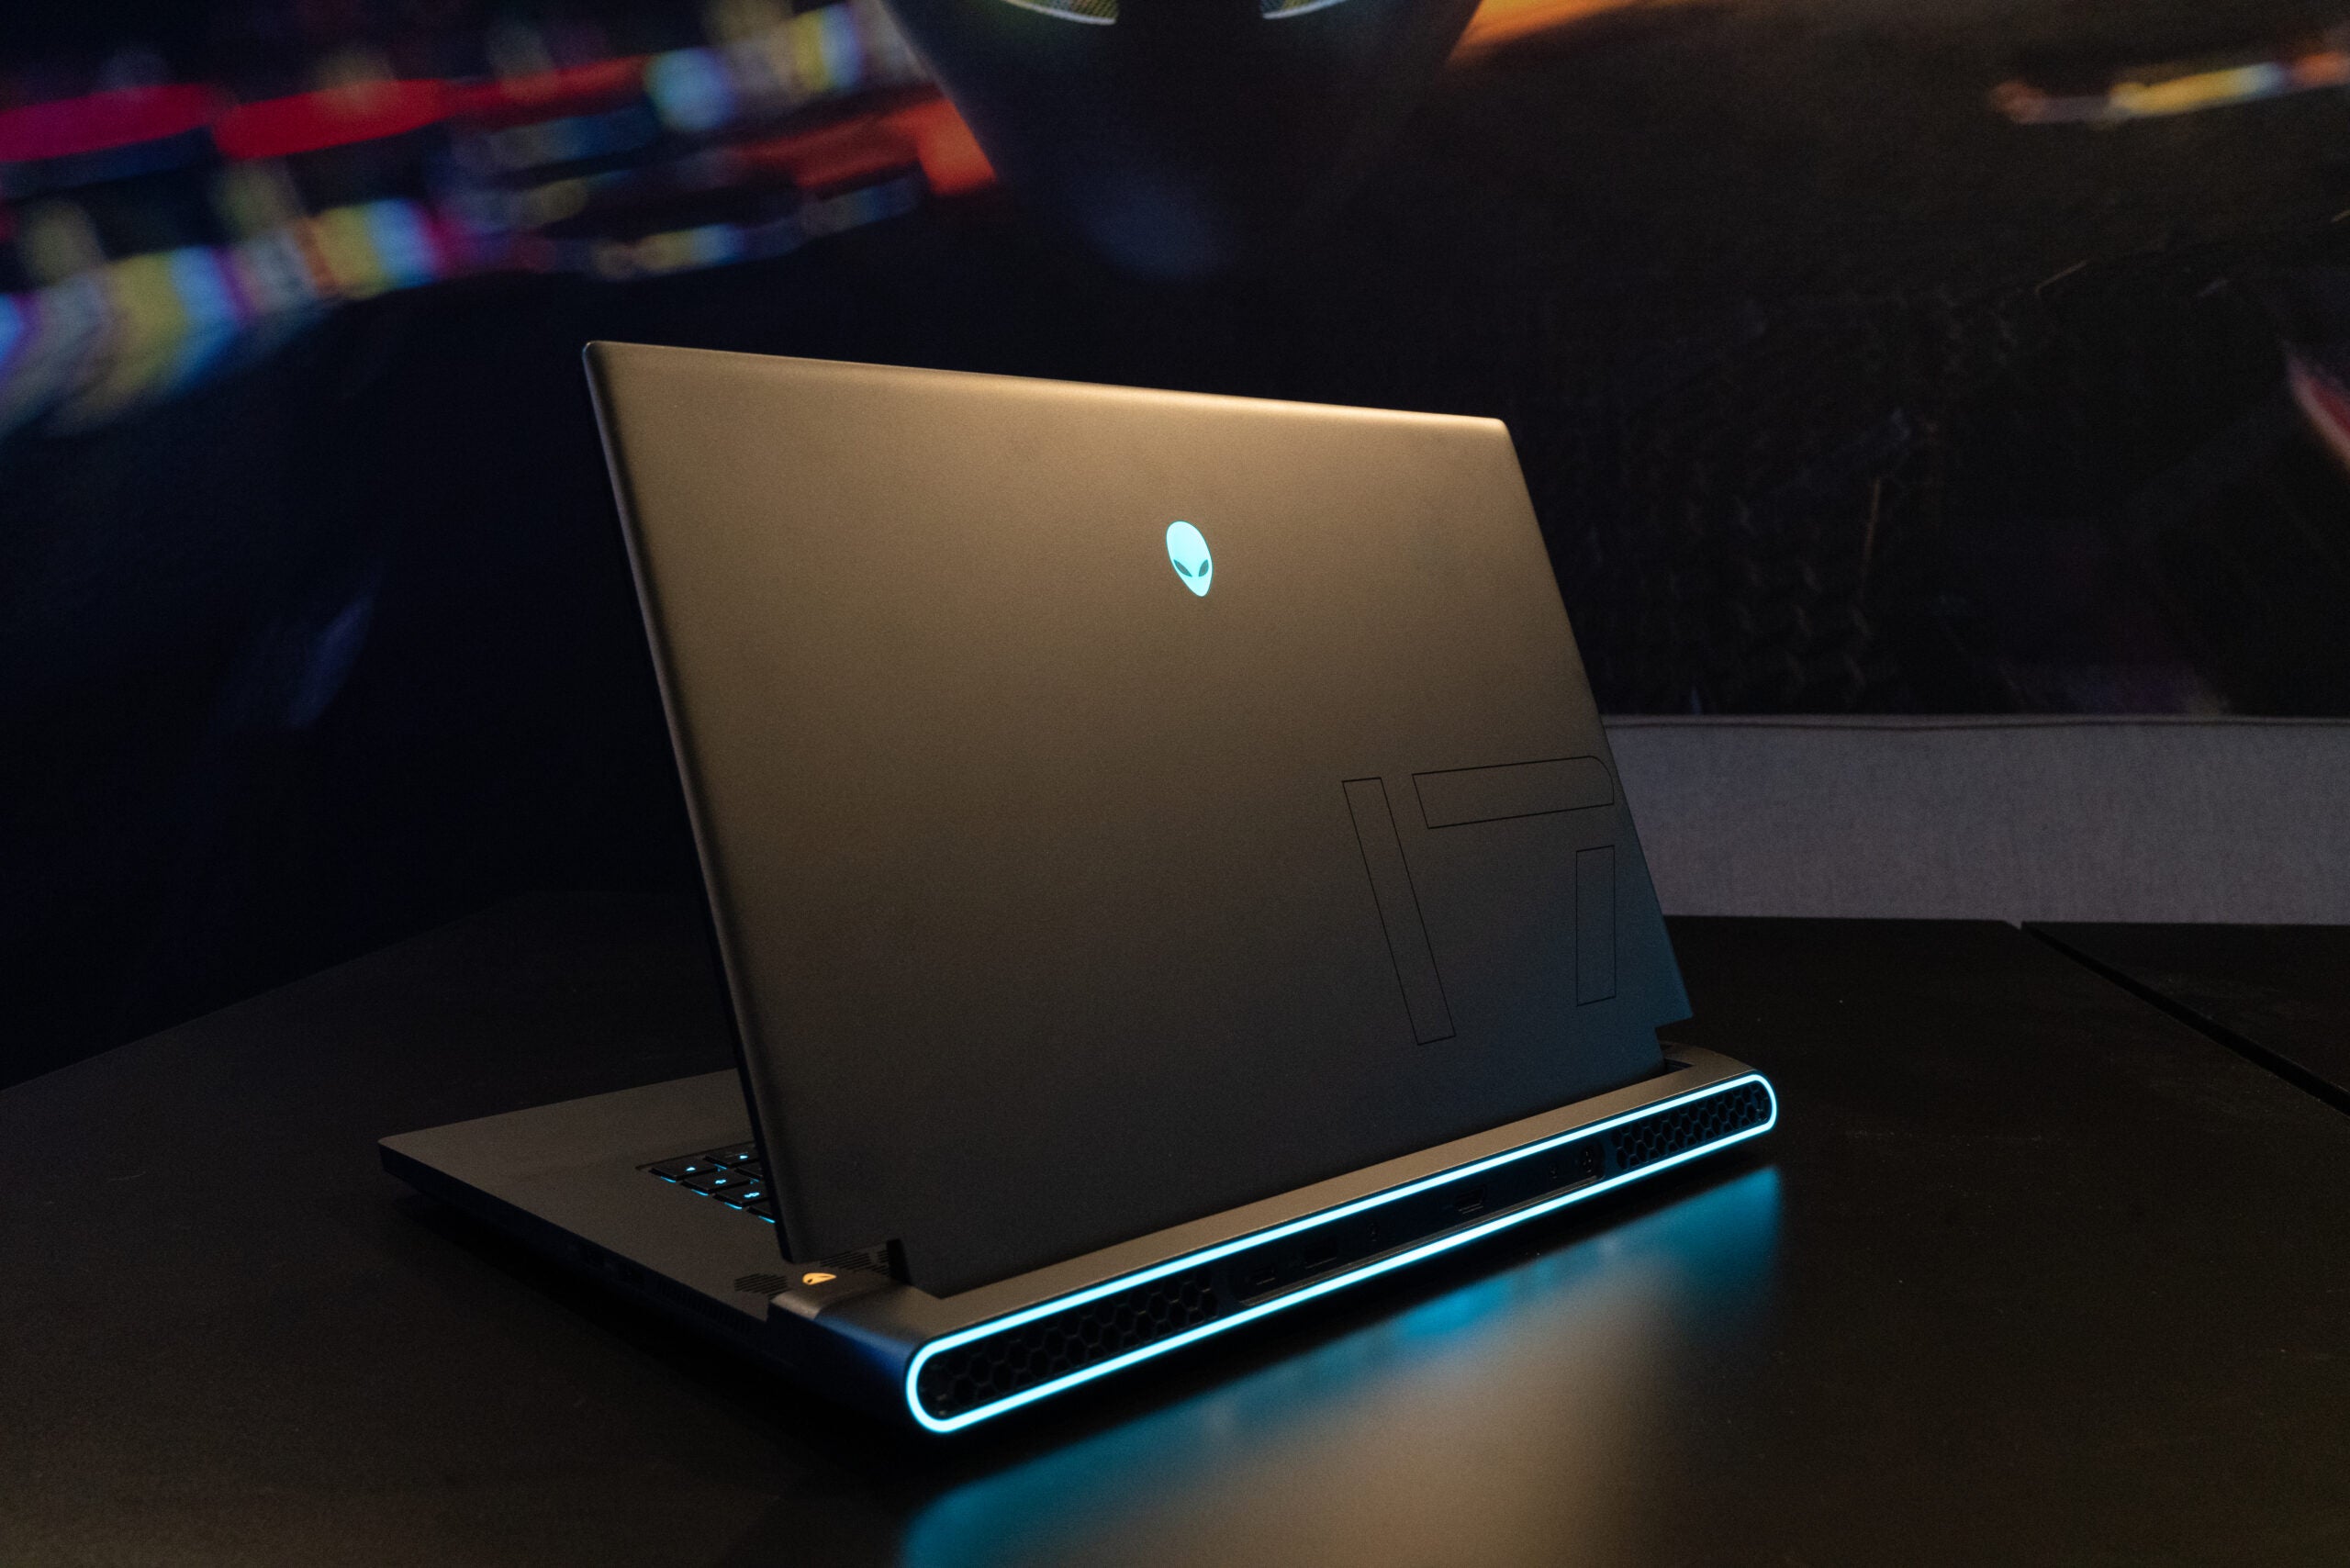 Alienware launches world's first 480Hz gaming laptop